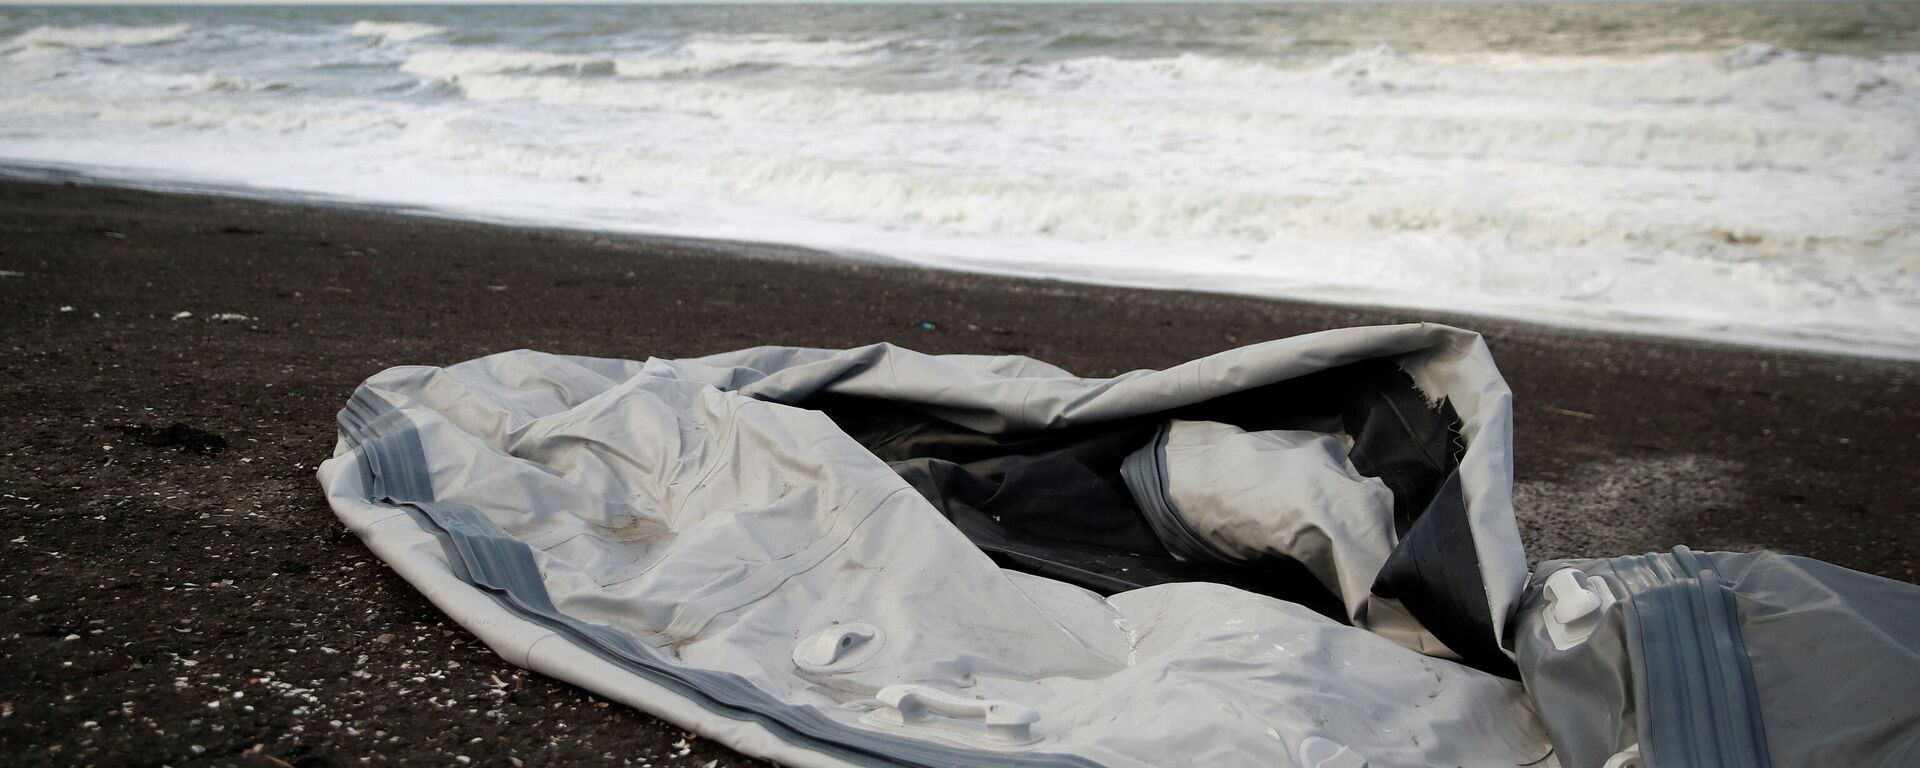 A damaged inflatable dinghy is seen on Loon Beach, the day after 27 migrants died when their dinghy deflated as they attempted to cross the English Channel, in Dunkerque near Calais, France, November 25, 2021.  - Sputnik International, 1920, 25.11.2021